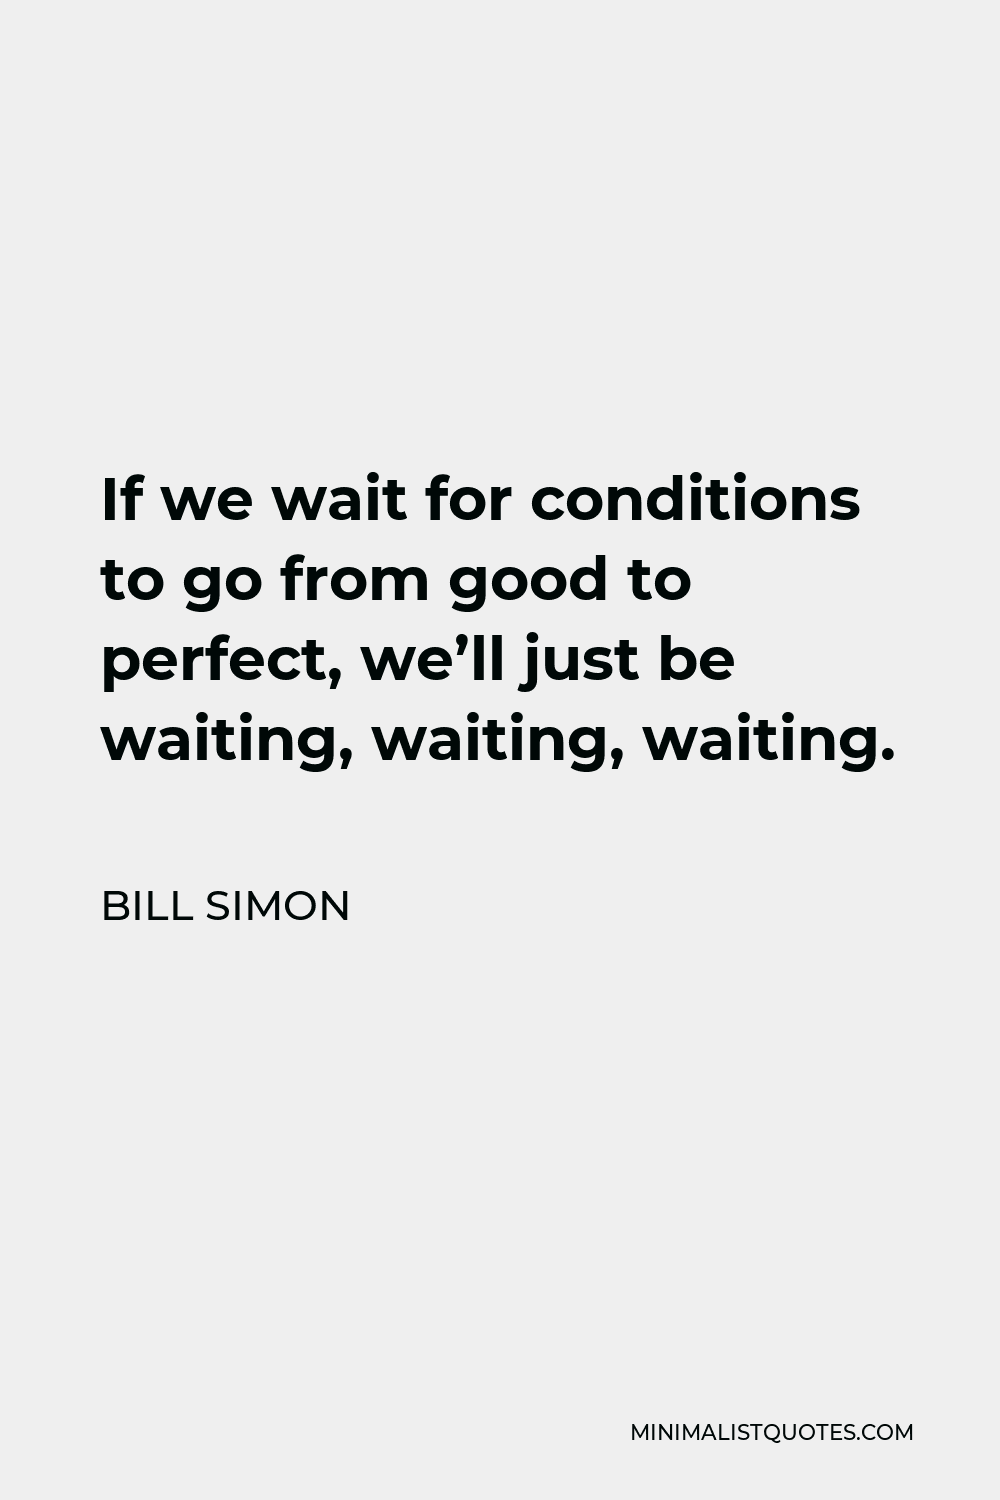 Bill Simon Quote - If we wait for conditions to go from good to perfect, we’ll just be waiting, waiting, waiting.